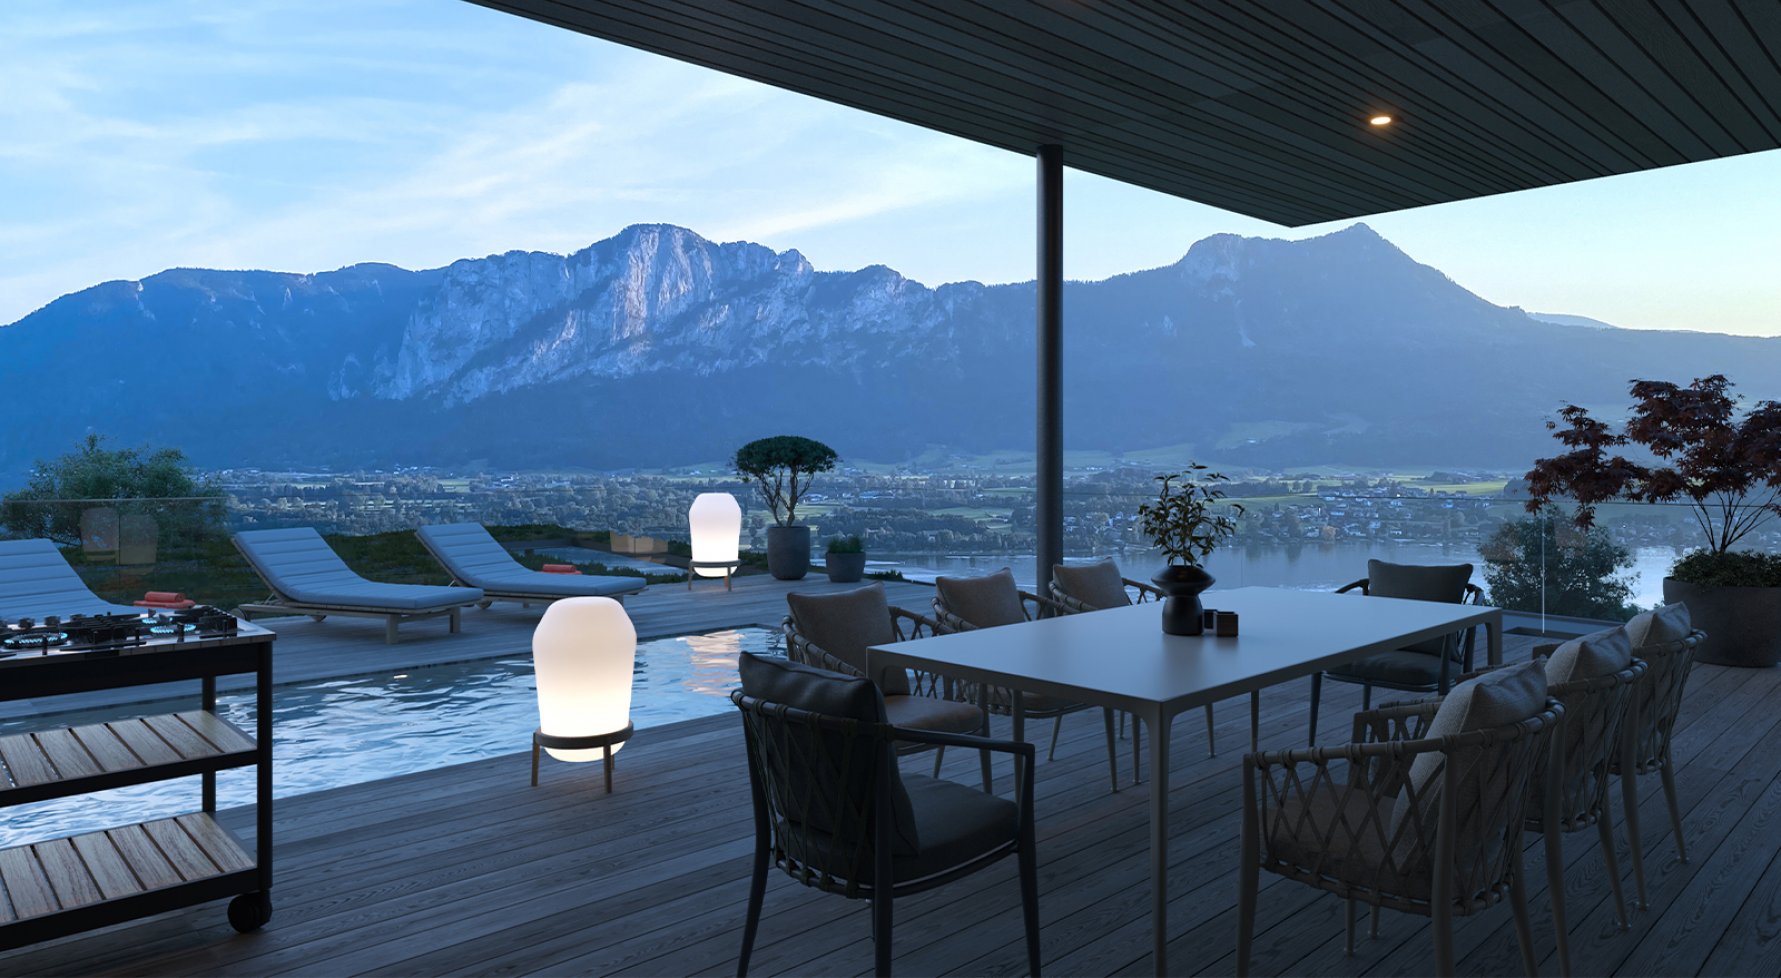 Property in 5310 Oberösterreich - Mondsee: EXCLUSIVE LIVING BY THE LAKE! Penthouse flat on the glittering Mondsee - picture 1